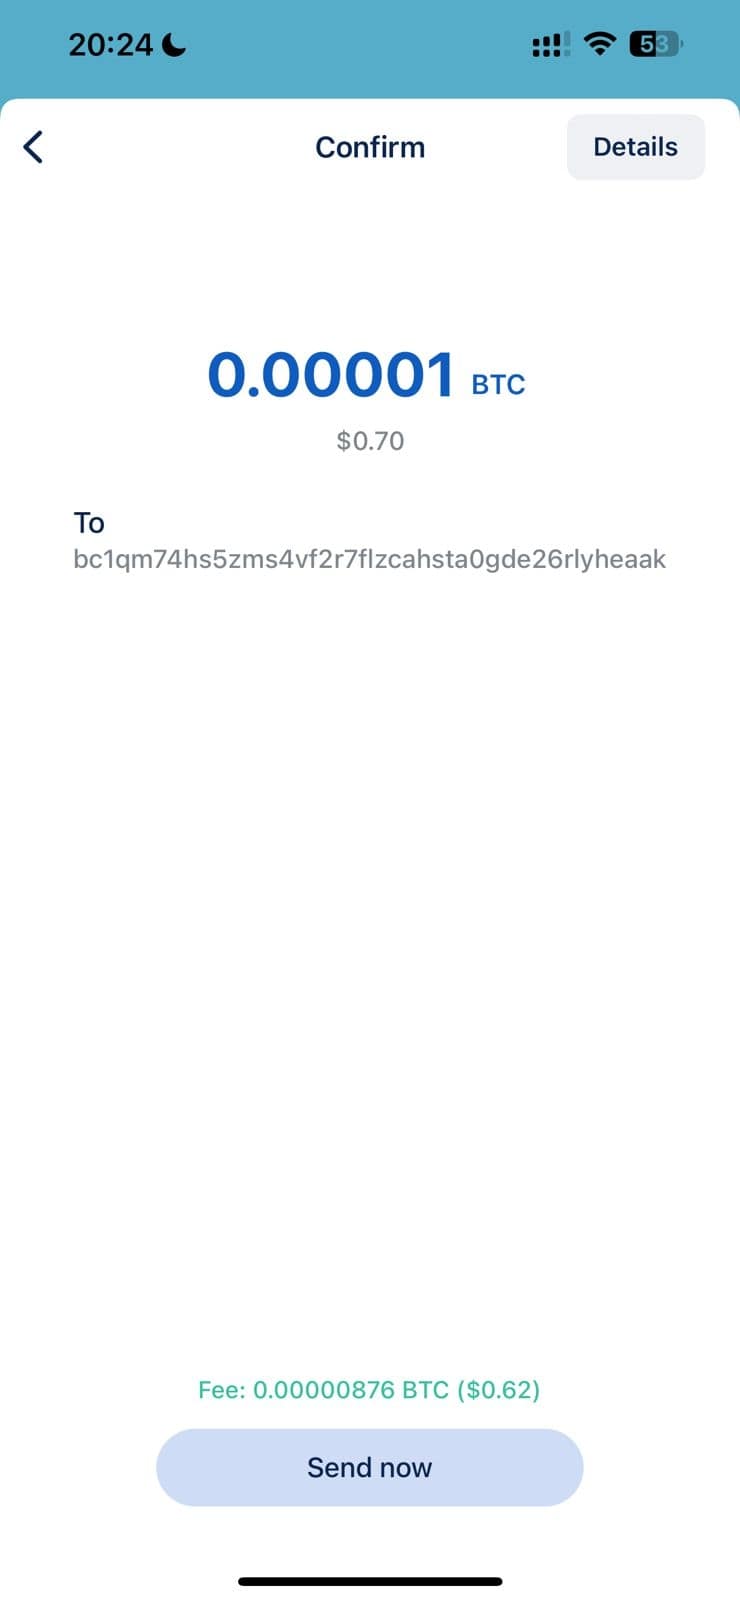 Confirming the data and fee of the transaction